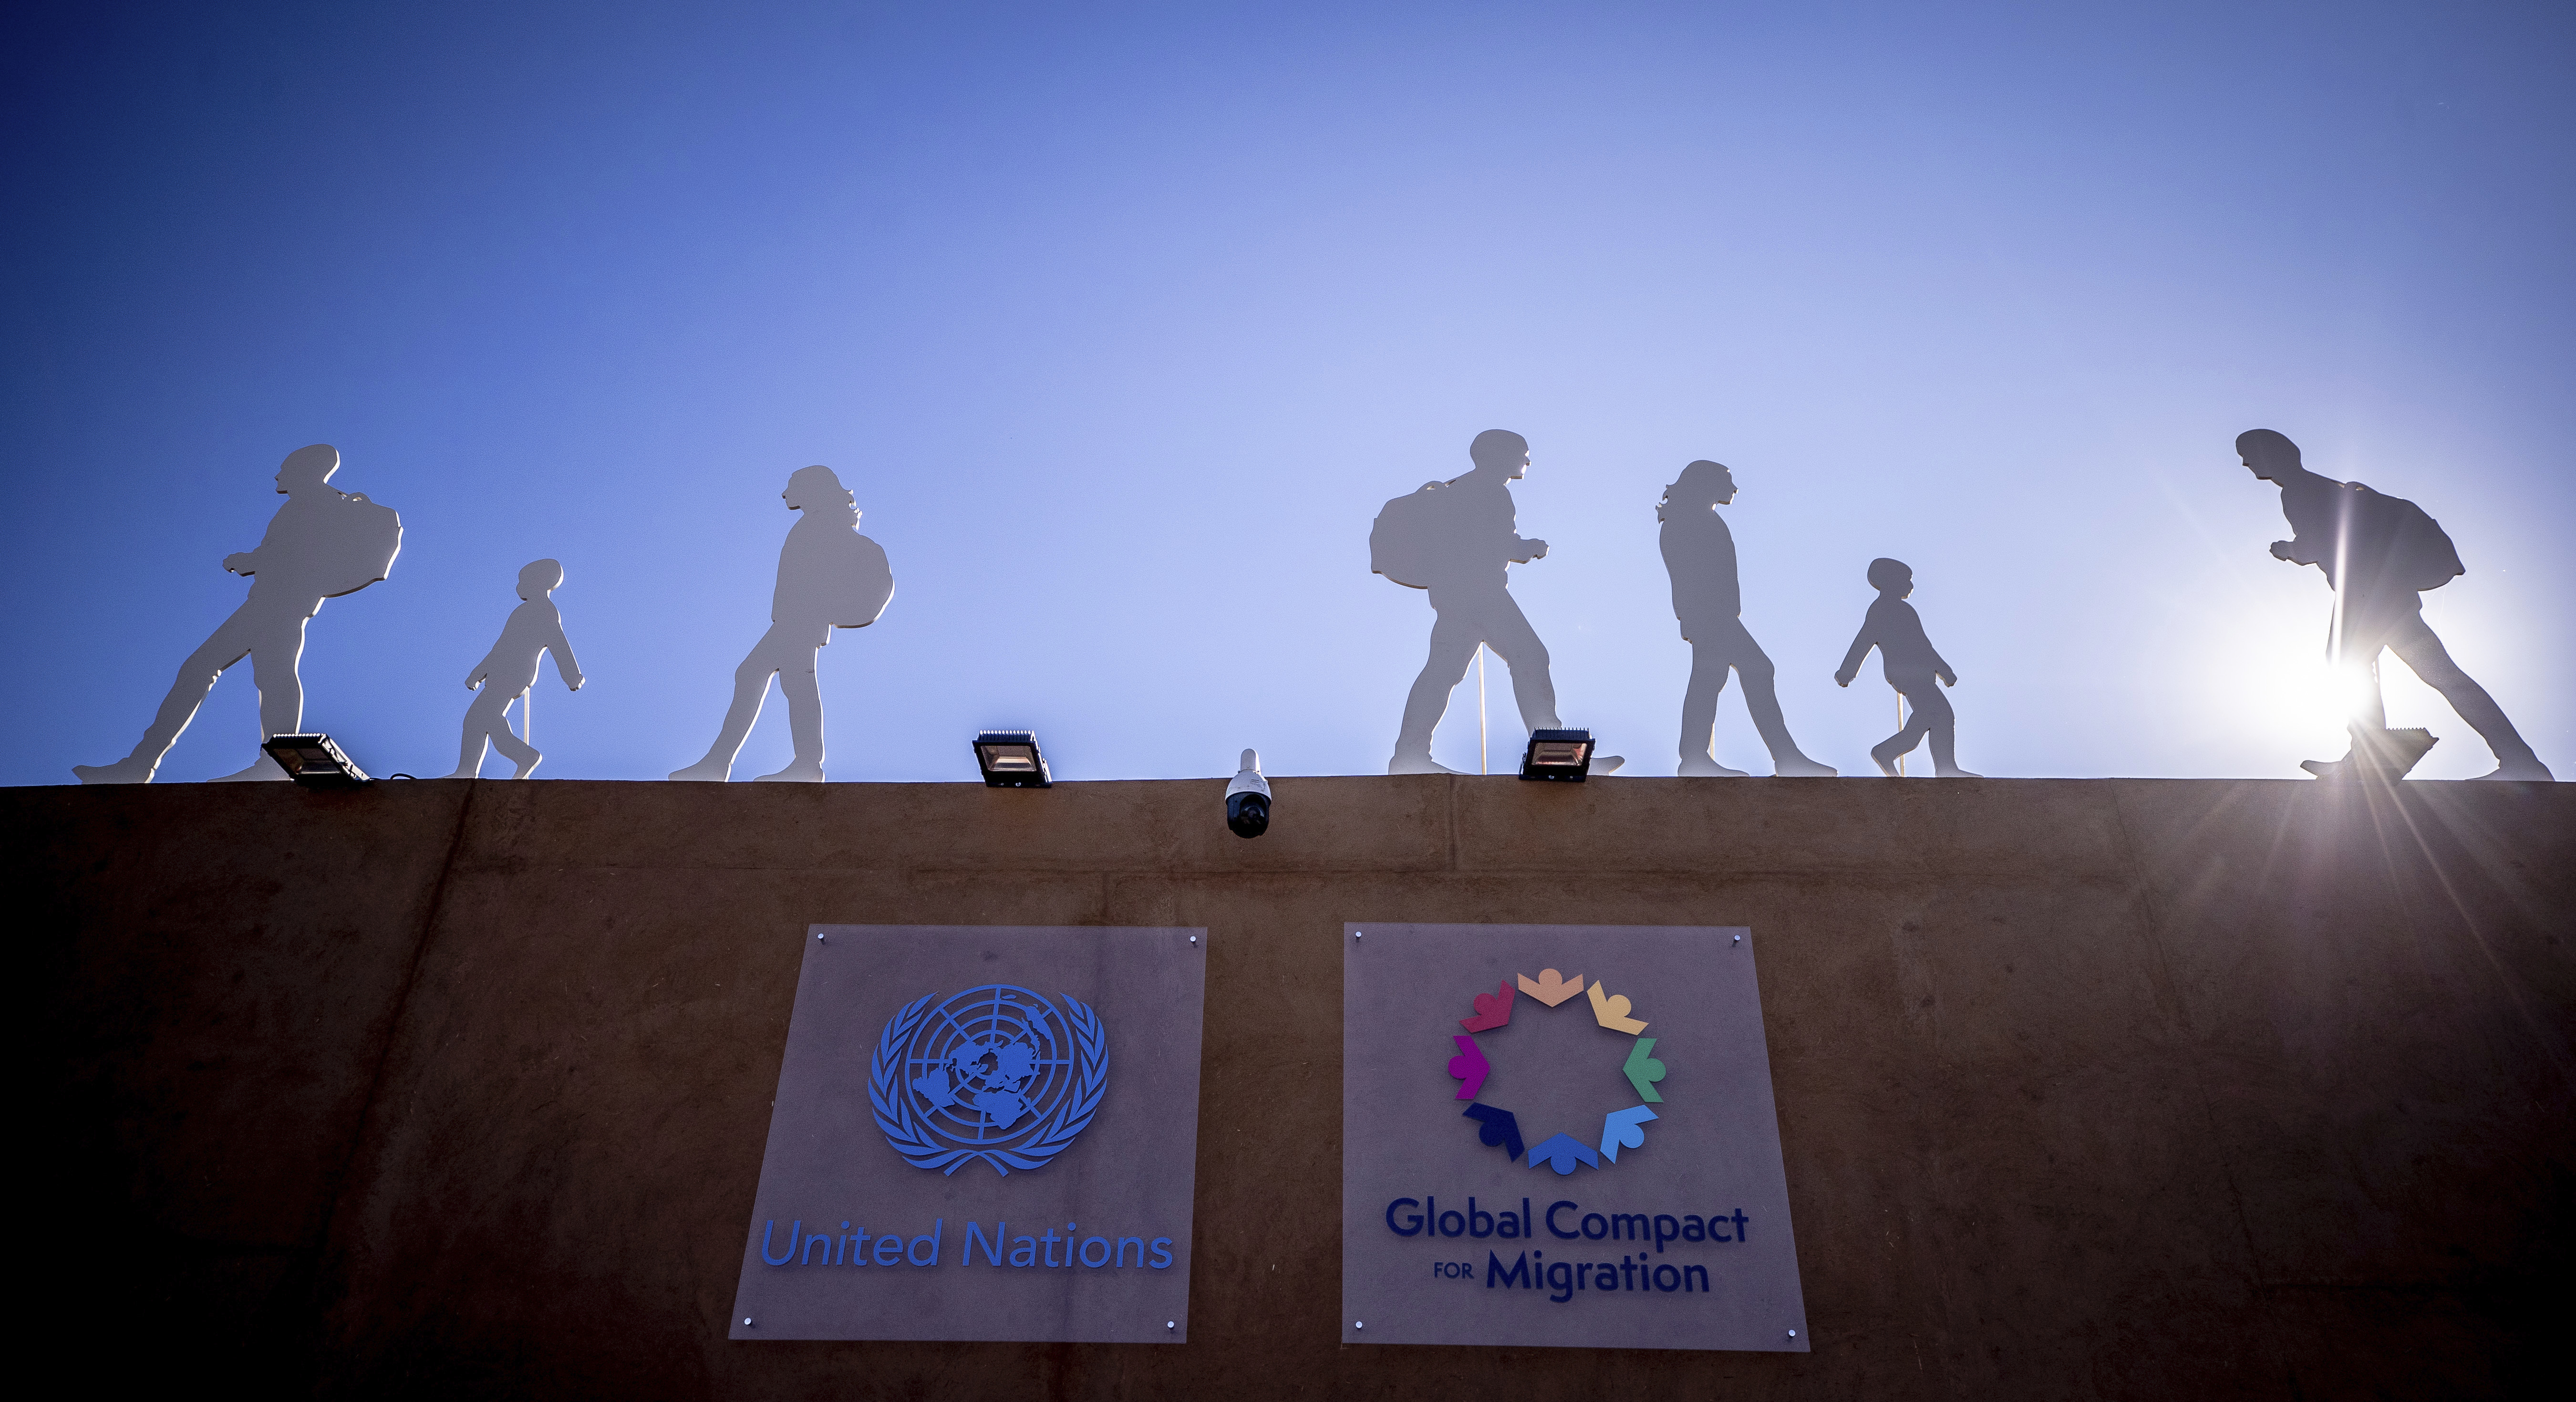 10 December 2018, Morocco, Marrakesch: Displays with silhouettes of migrants stand on the grounds of the UN Conference on the Migration Pact. Chancellor Merkel (CDU) has praised the UN Migration Pact as a milestone in international migration policy. Photo by: Michael Kappeler/picture-alliance/dpa/AP Images